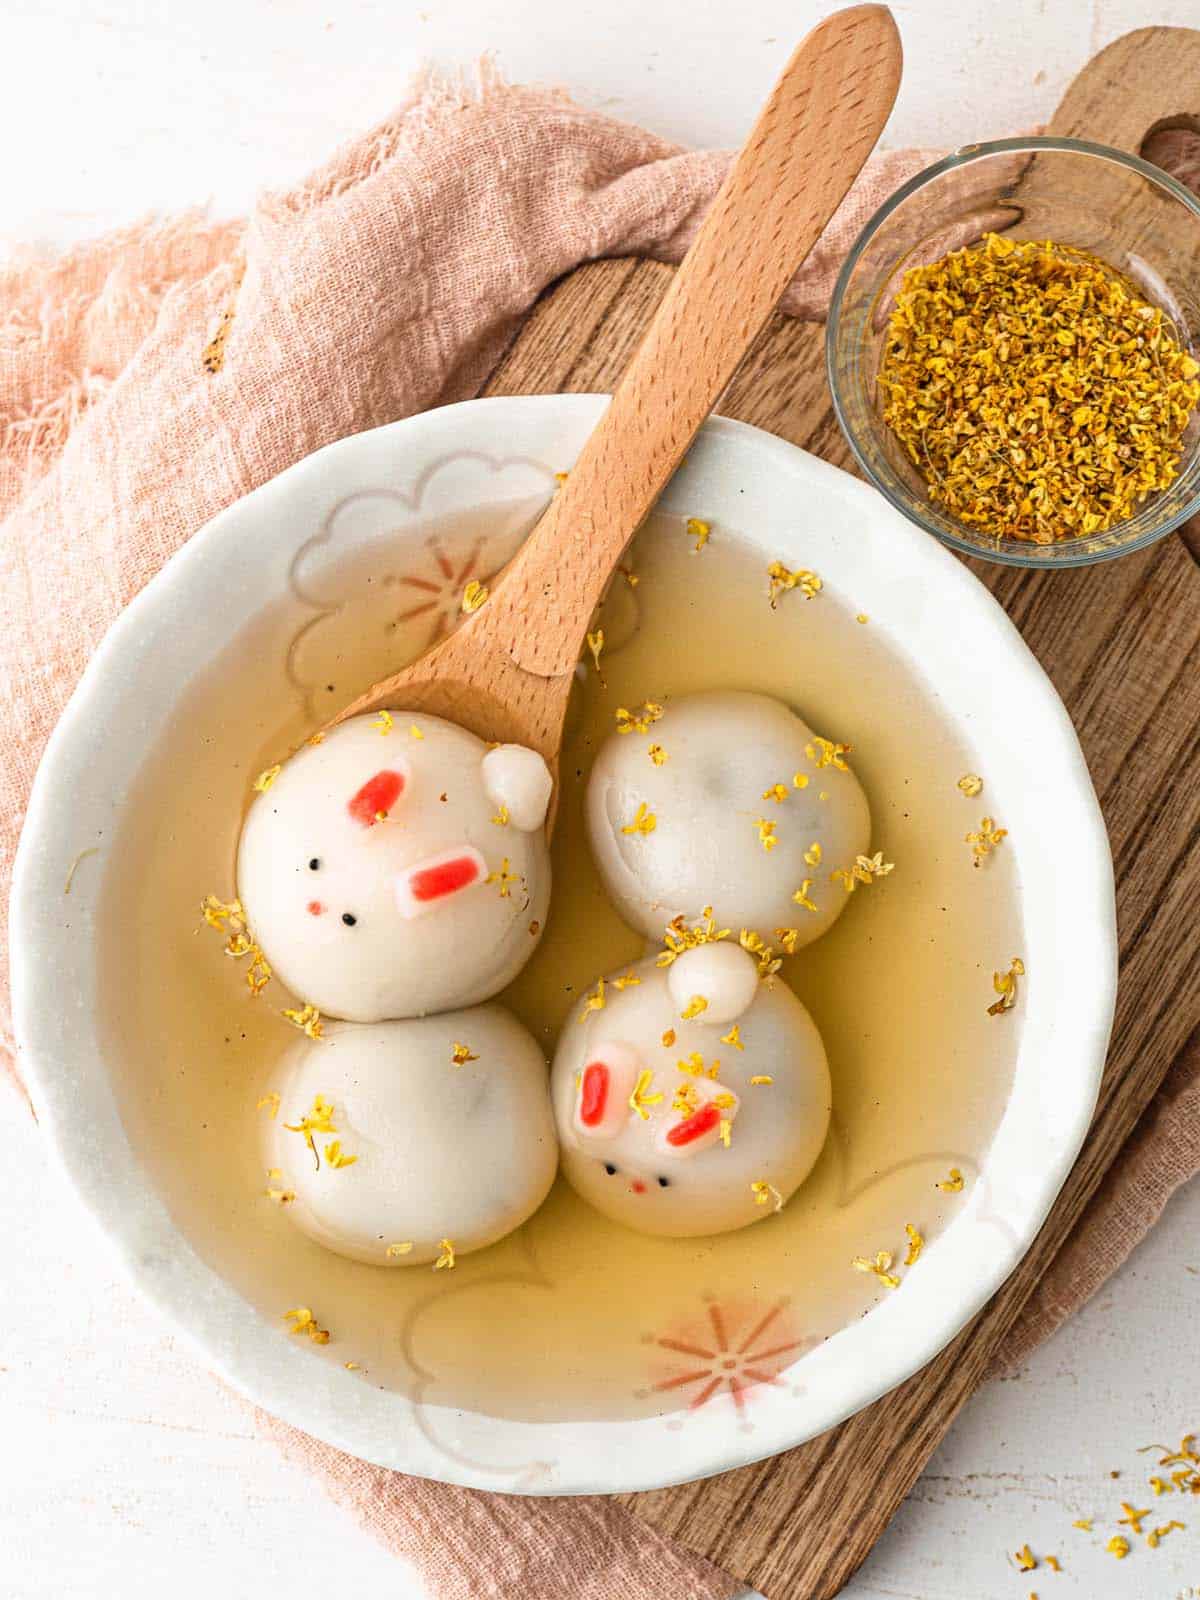 bunny shaped tang yuan filled with black sesame in ginger soup